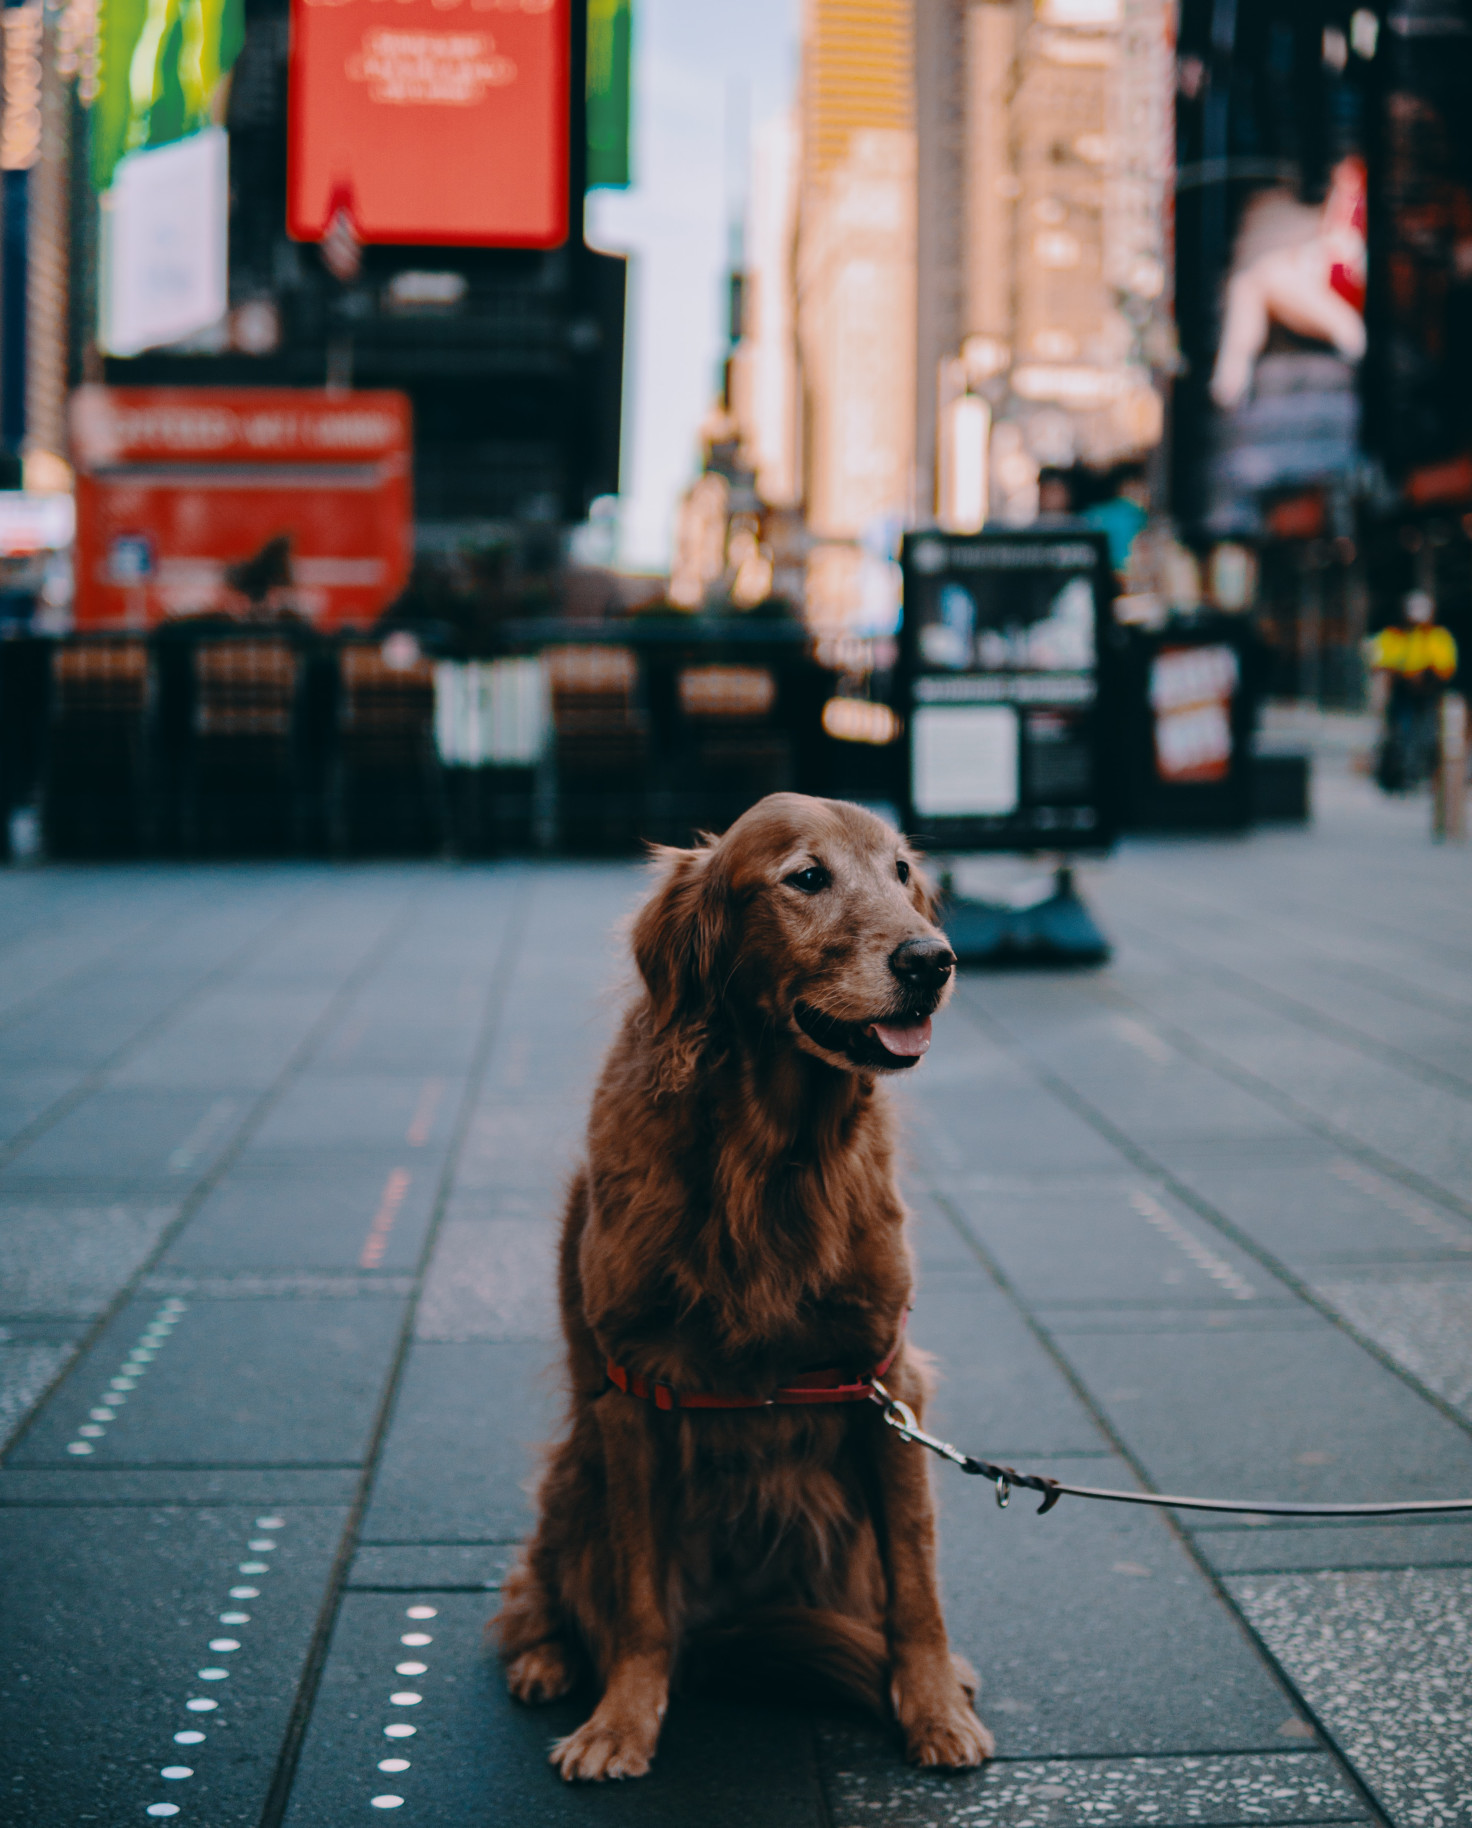 Golden retriever sits on the street in NYC with buildings and billboards in background